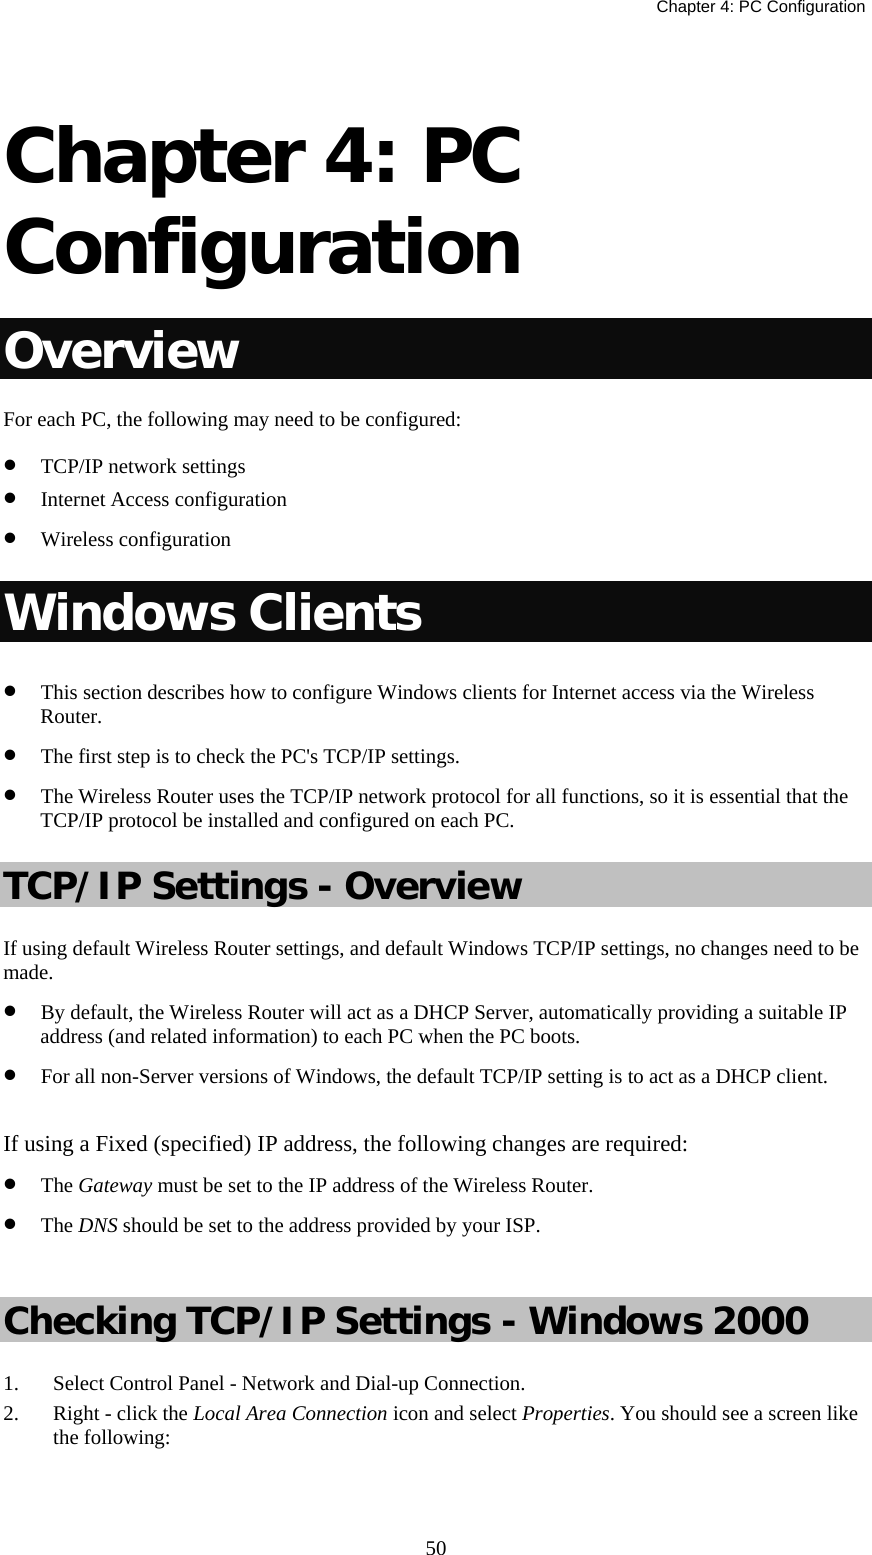   Chapter 4: PC Configuration  50 Chapter 4: PC Configuration Overview For each PC, the following may need to be configured: • TCP/IP network settings • Internet Access configuration • Wireless configuration Windows Clients • This section describes how to configure Windows clients for Internet access via the Wireless Router. • The first step is to check the PC&apos;s TCP/IP settings.  • The Wireless Router uses the TCP/IP network protocol for all functions, so it is essential that the TCP/IP protocol be installed and configured on each PC. TCP/IP Settings - Overview If using default Wireless Router settings, and default Windows TCP/IP settings, no changes need to be made. • By default, the Wireless Router will act as a DHCP Server, automatically providing a suitable IP address (and related information) to each PC when the PC boots. • For all non-Server versions of Windows, the default TCP/IP setting is to act as a DHCP client.  If using a Fixed (specified) IP address, the following changes are required: • The Gateway must be set to the IP address of the Wireless Router. • The DNS should be set to the address provided by your ISP.  Checking TCP/IP Settings - Windows 2000 1. Select Control Panel - Network and Dial-up Connection. 2. Right - click the Local Area Connection icon and select Properties. You should see a screen like the following: 